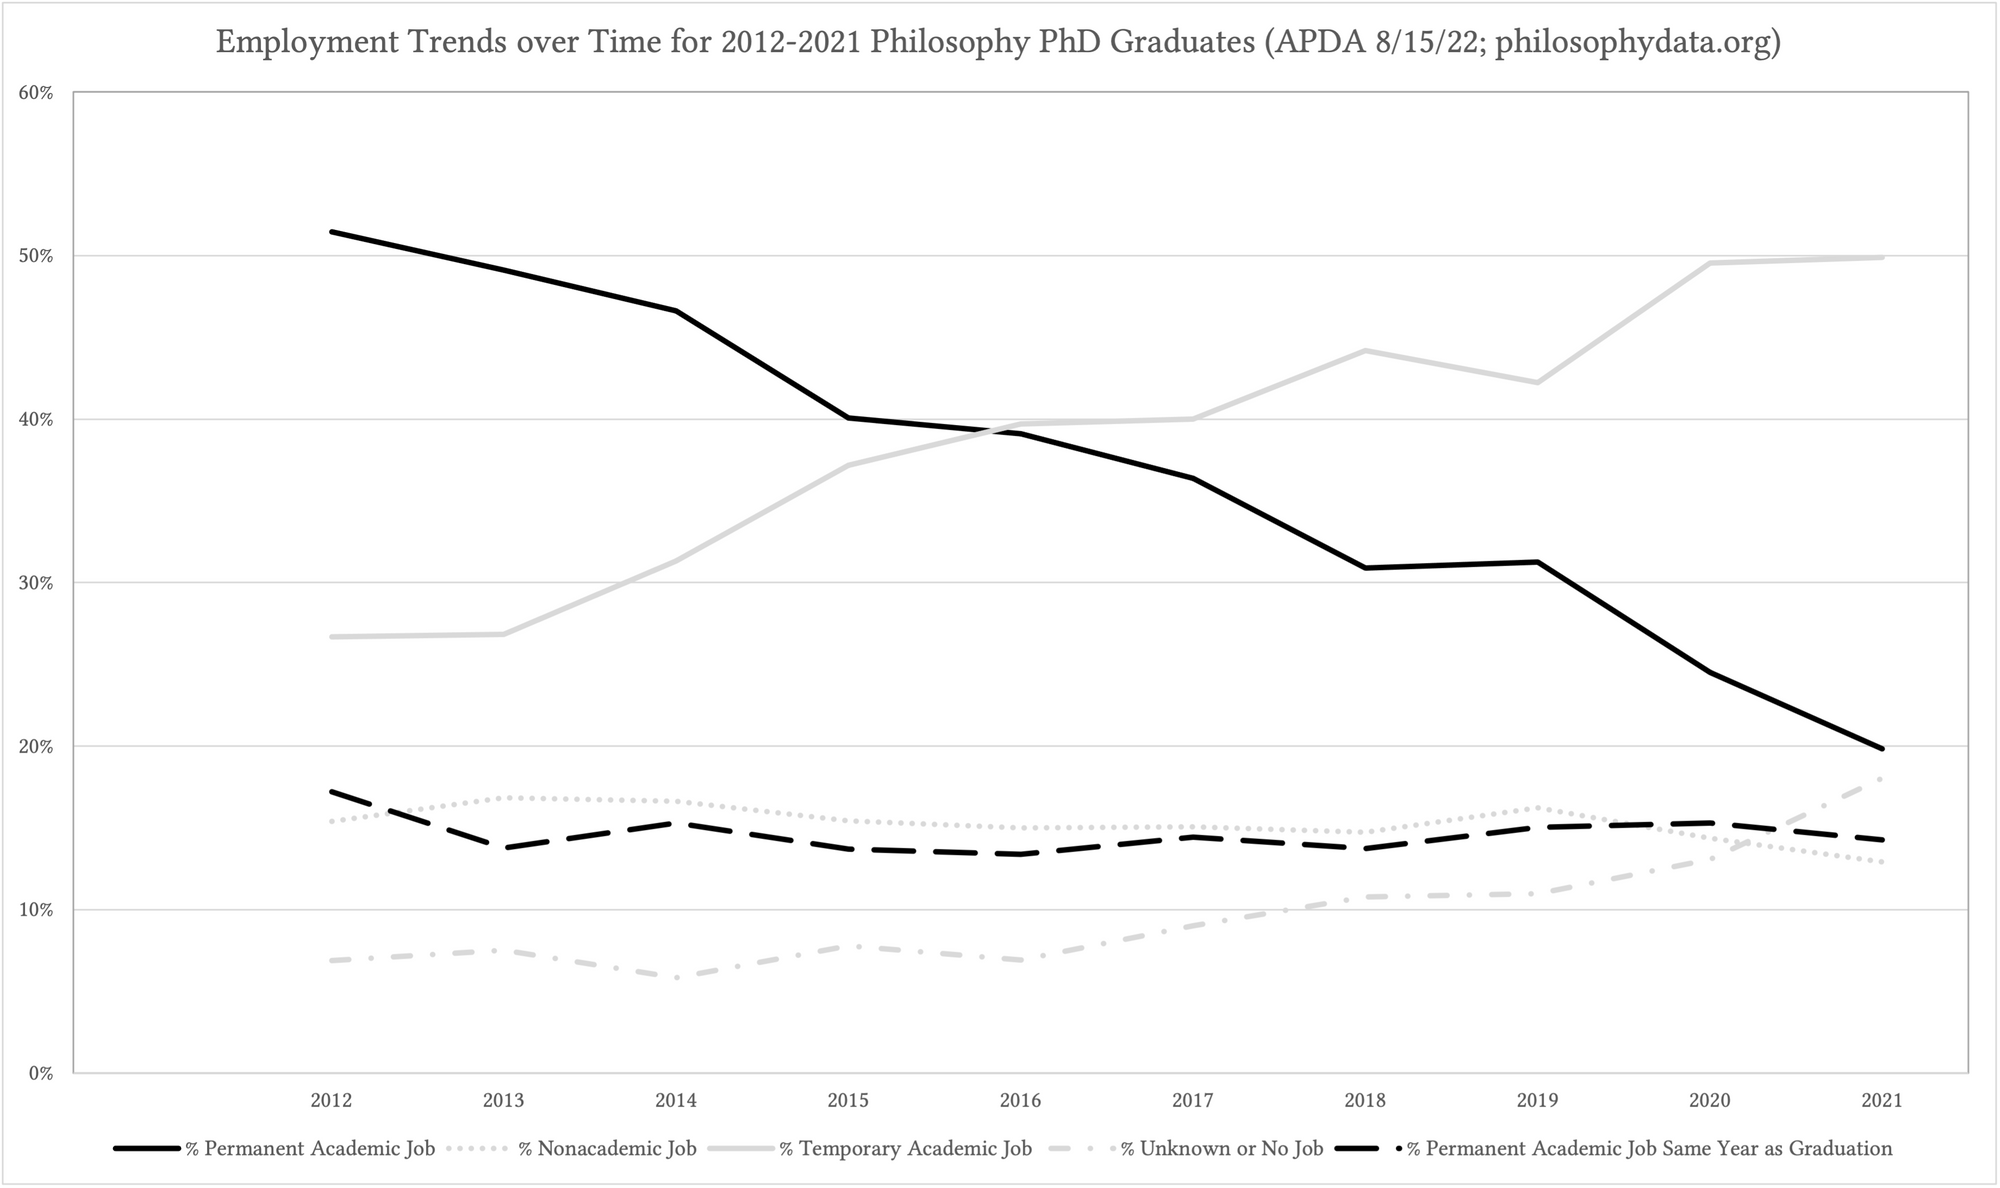 Chart depicting employment trends over time for 2012-2021 Philosophy PhD Graduates, with the proportion of graduates in permanent academic jobs dropping from 2012 graduates to 2021 graduates, but the proportion of graduates in permanent academic jobs the same year as graduation staying flat.